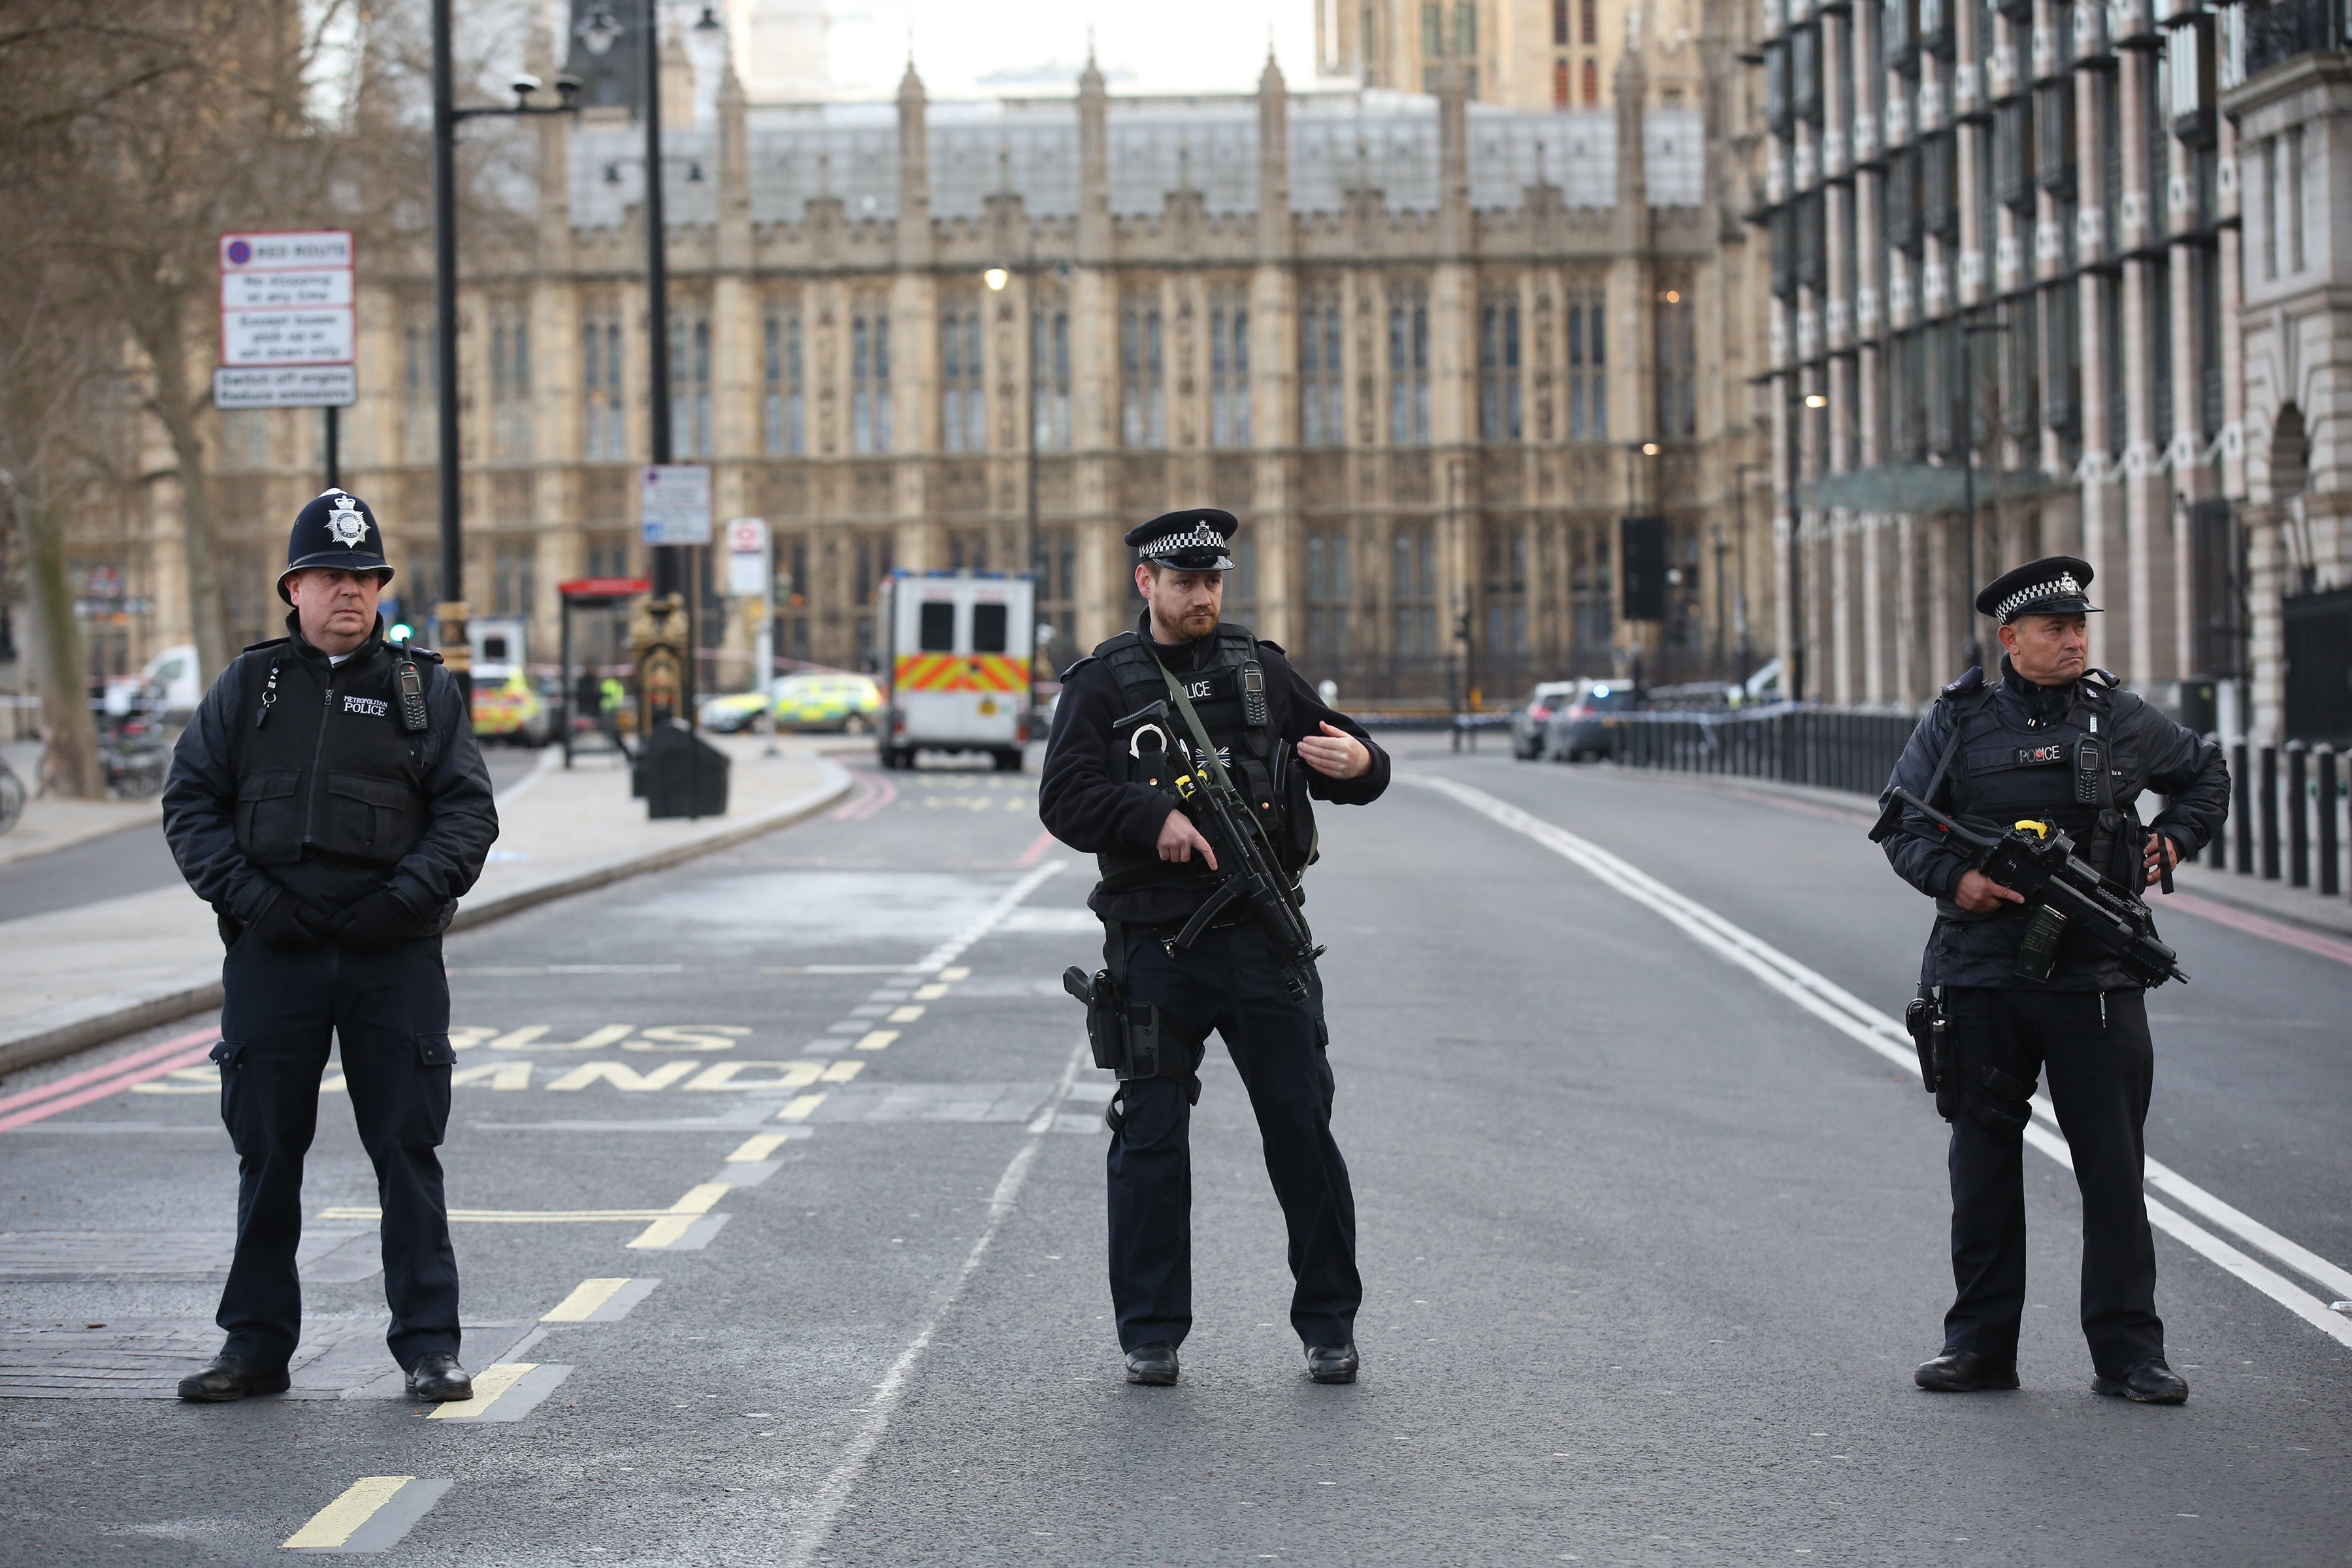 Suspected Terror Incident At the Houses of Parliament